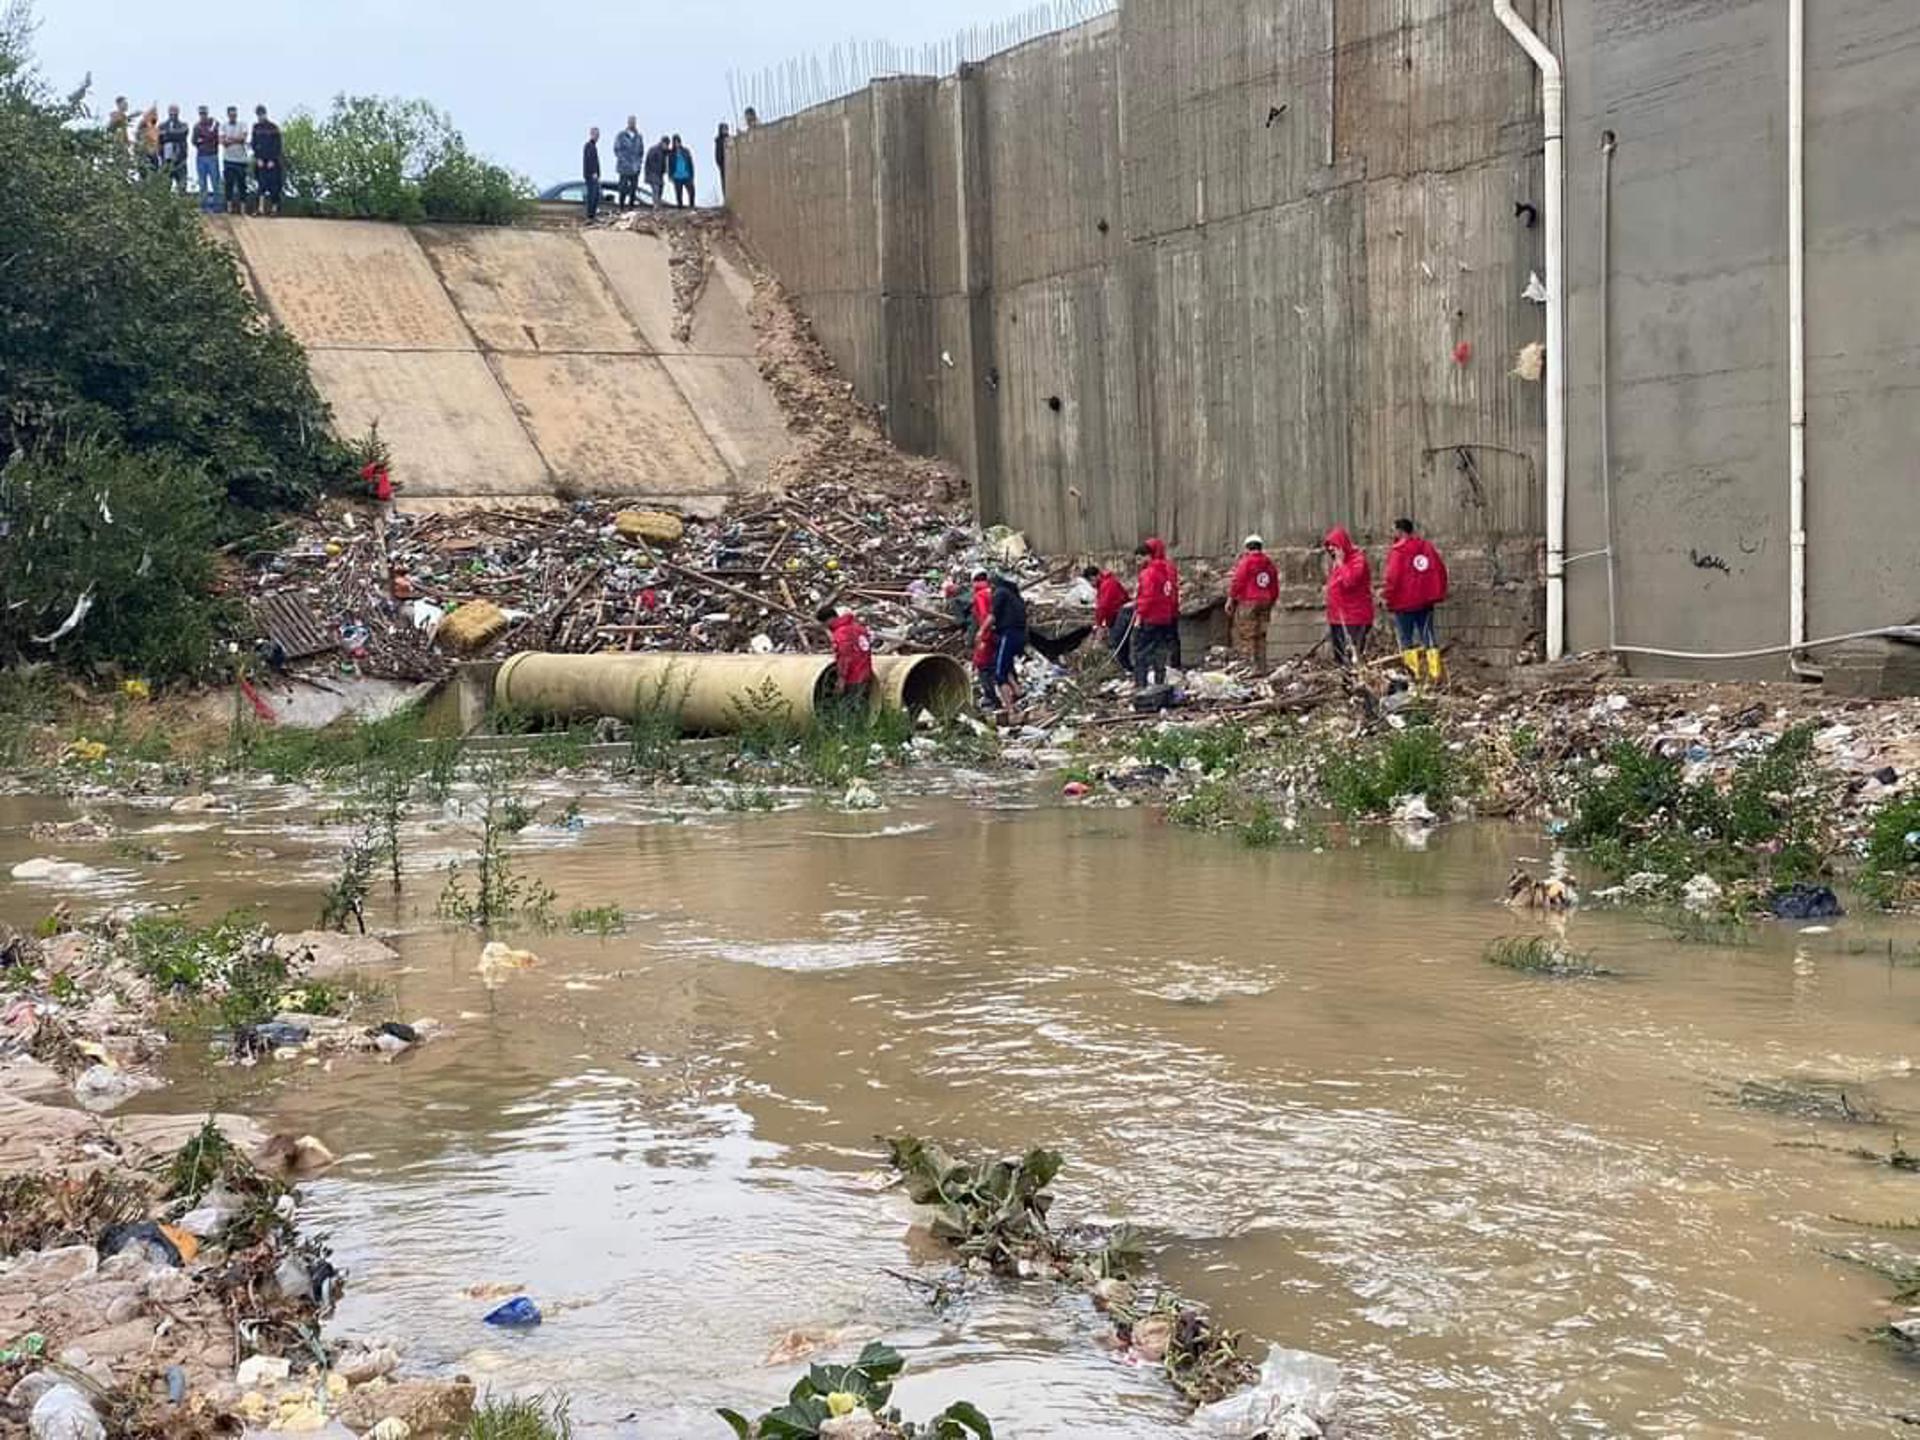 A handout photo made available by the Libyan Red Crescent shows members of the organization working to open roads in flooded areas at an undefined location in eastern Libya, 11 August 2023 (issued 13 September 2023). EFE/EPA/HANDOUT HANDOUT EDITORIAL USE ONLY/NO SALES